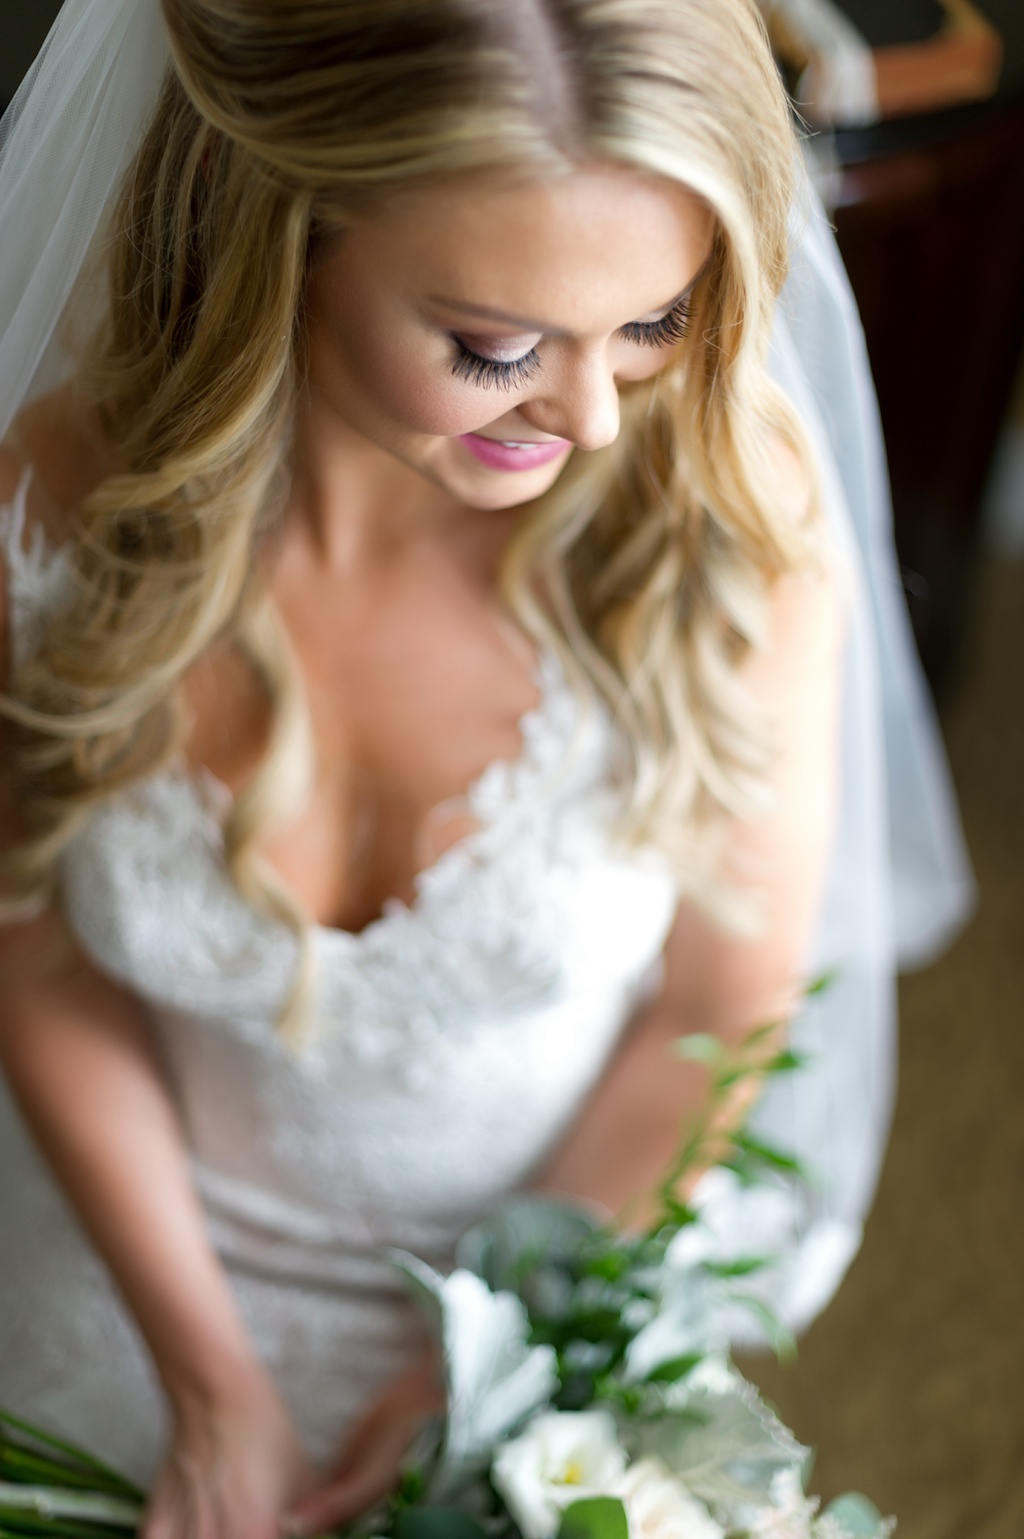 Bride Wedding Portrait, Curled Hair Half Pulled Back, Neutral Makeup | Tampa Bay Photographer Andi Diamond Photography | Hair and Makeup Michele Renee the Studio